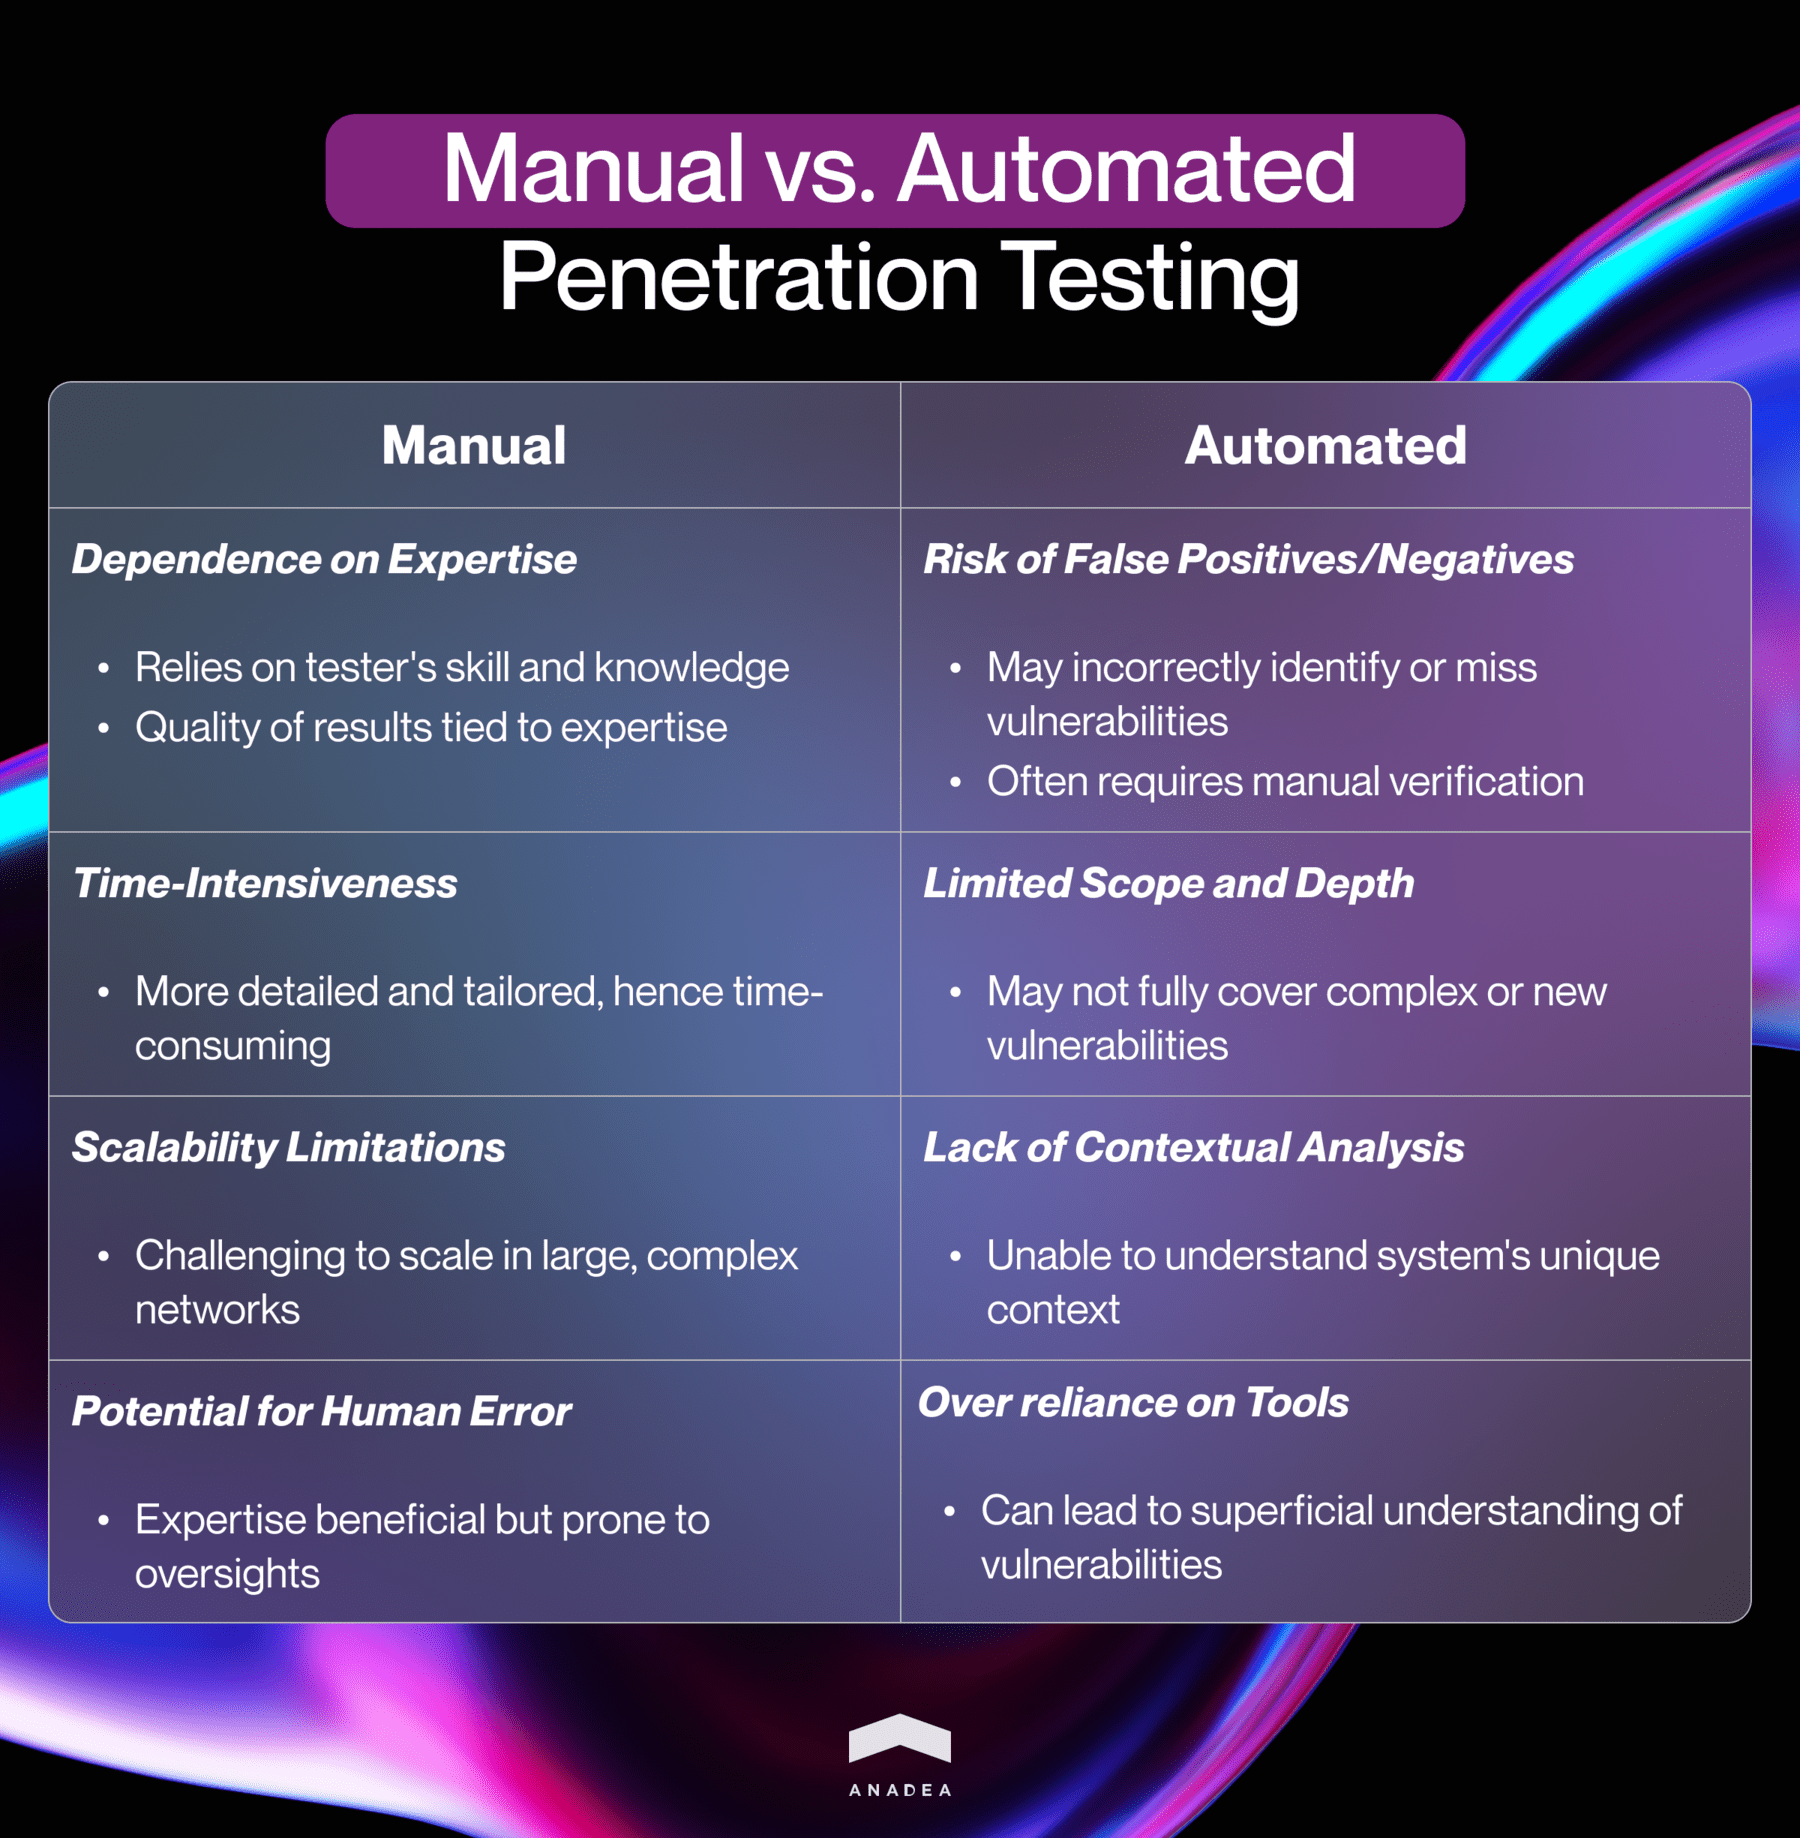 Manual vs Automated penetration testing difference table